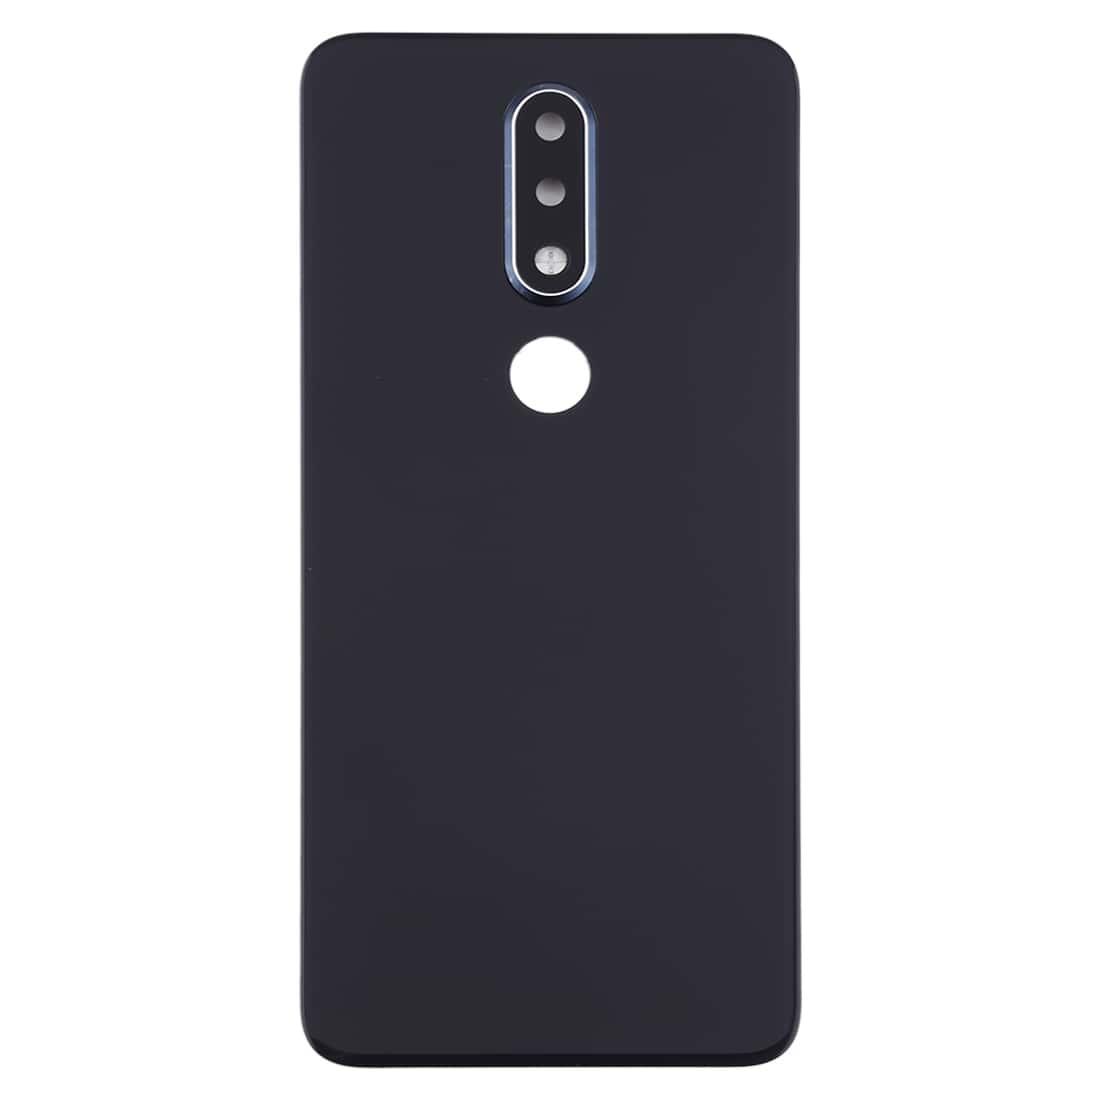 Back Glass Panel for Nokia X6 2018 6.1 Plus Blue with Camera Lens